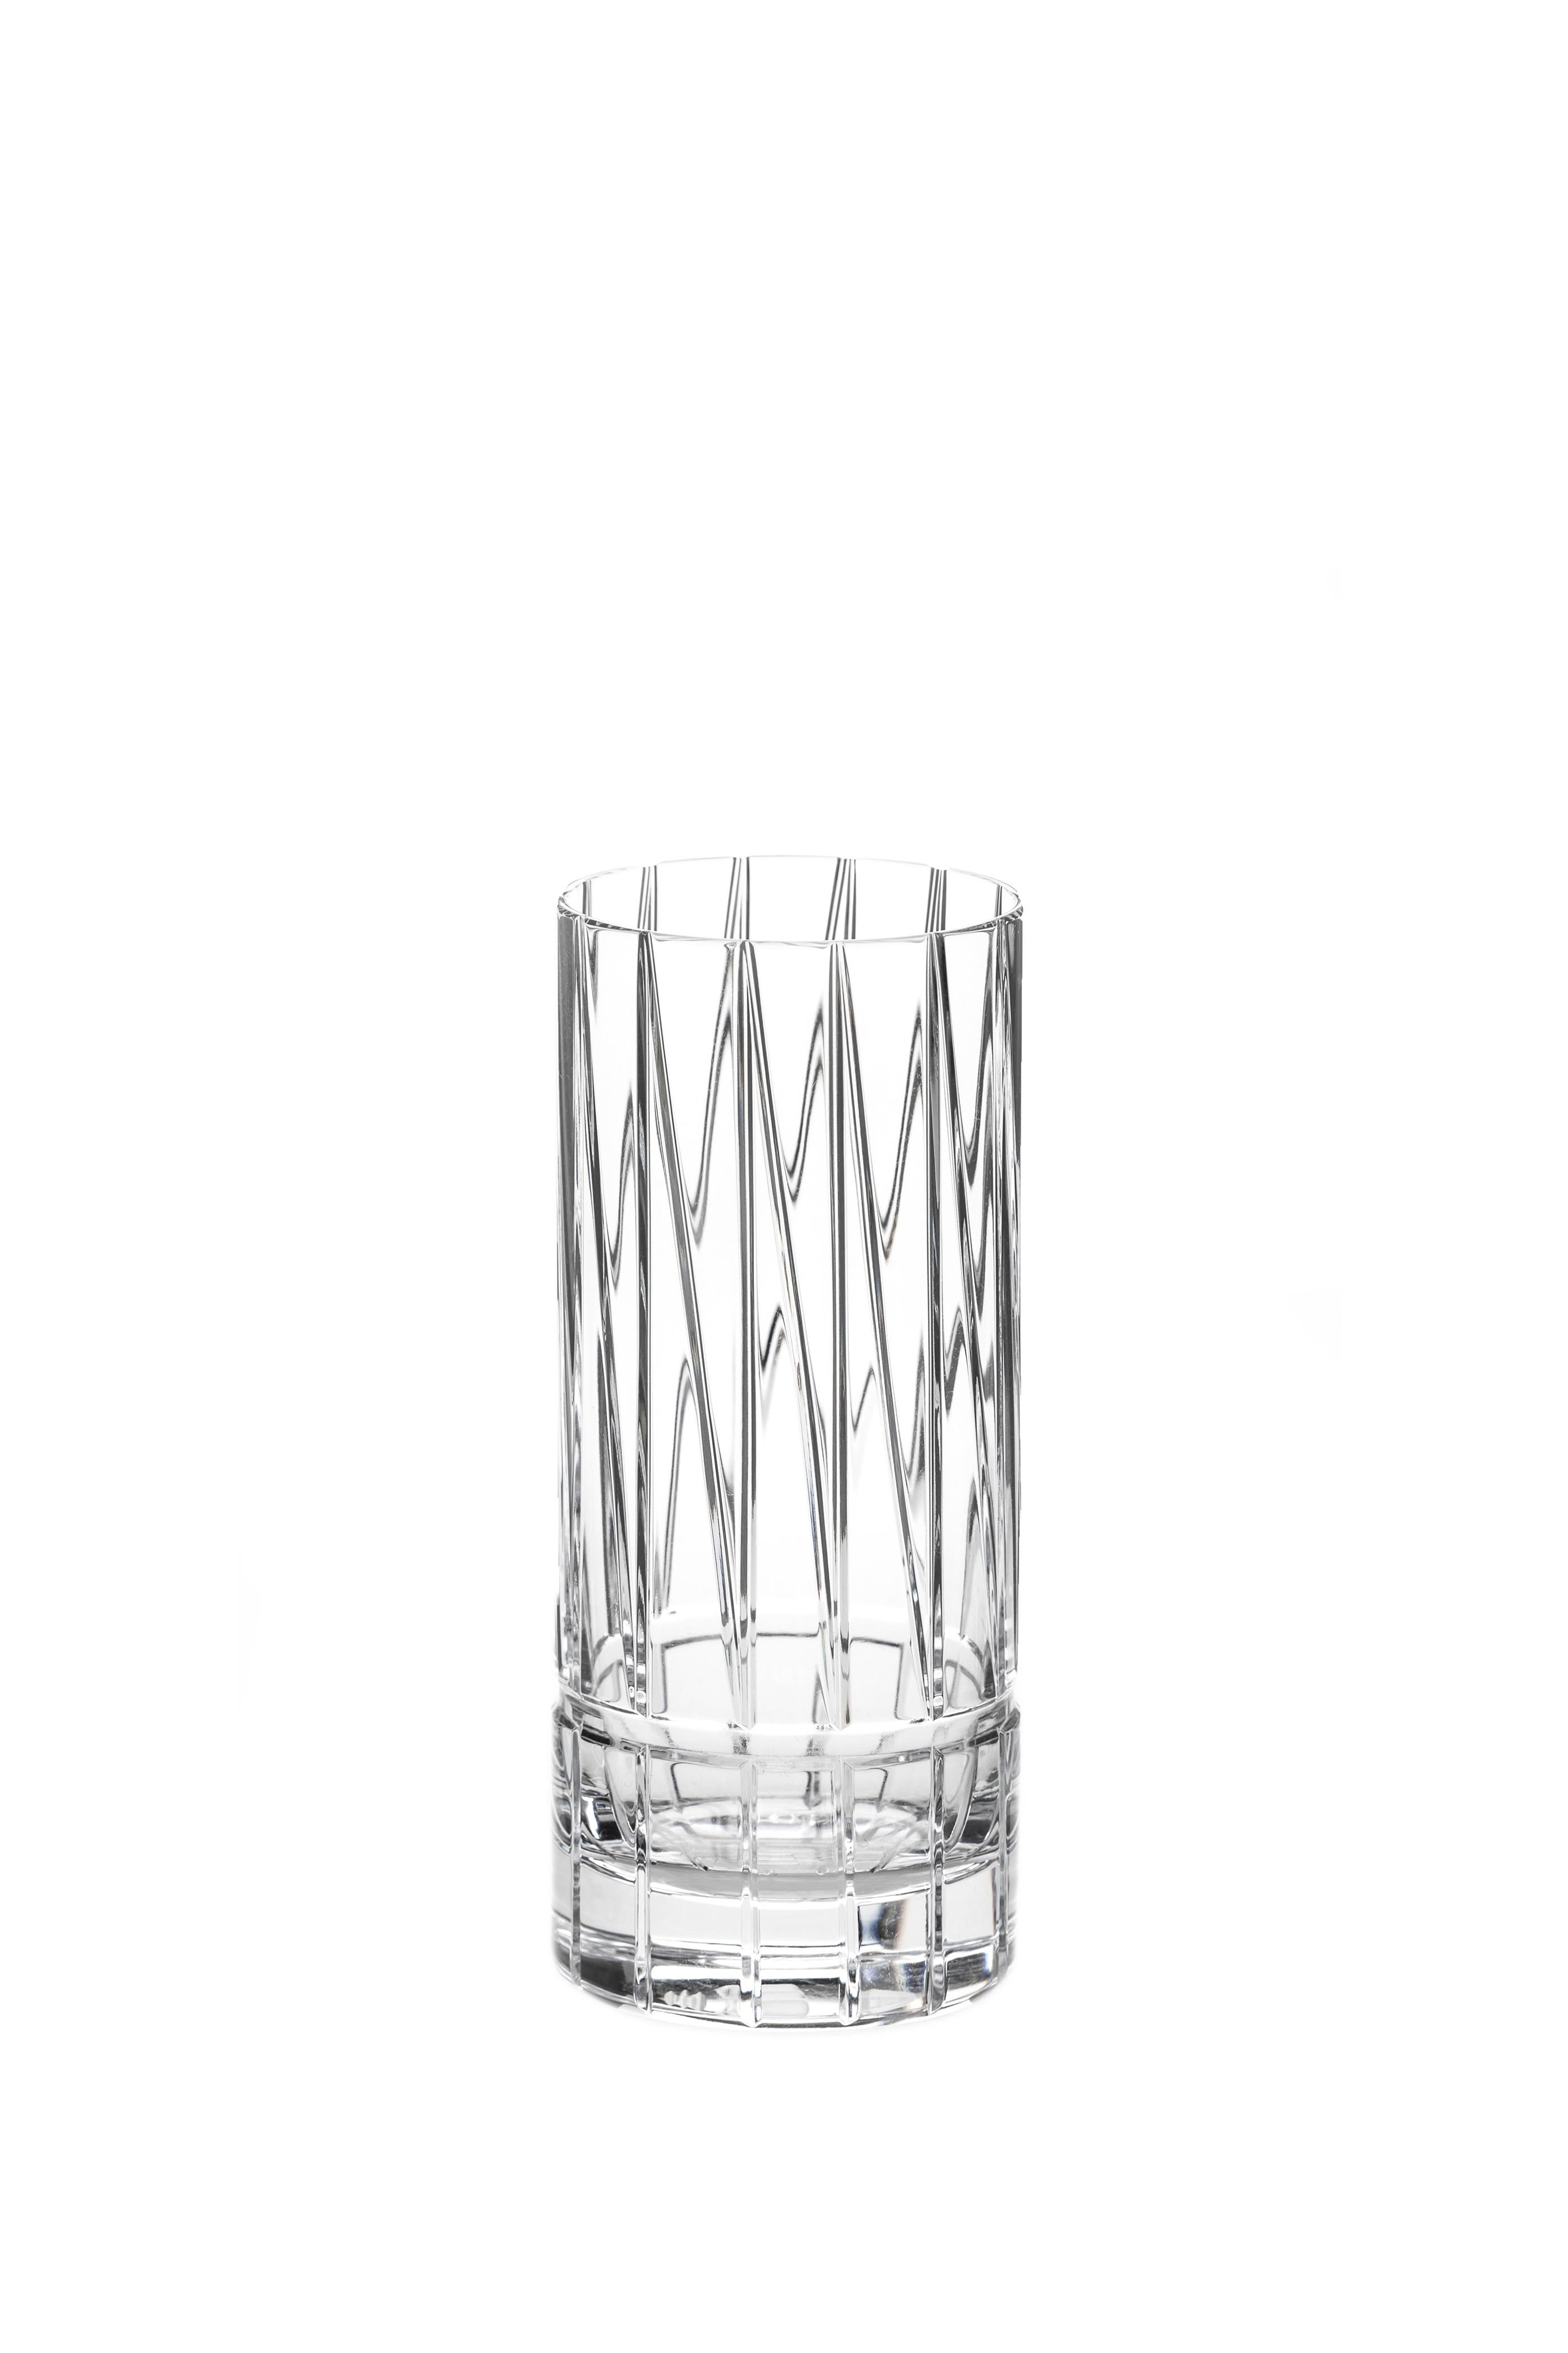 Hand-Crafted Scholten & Baijings Handmade Irish Crystal High Glass 'Elements' Series For Sale